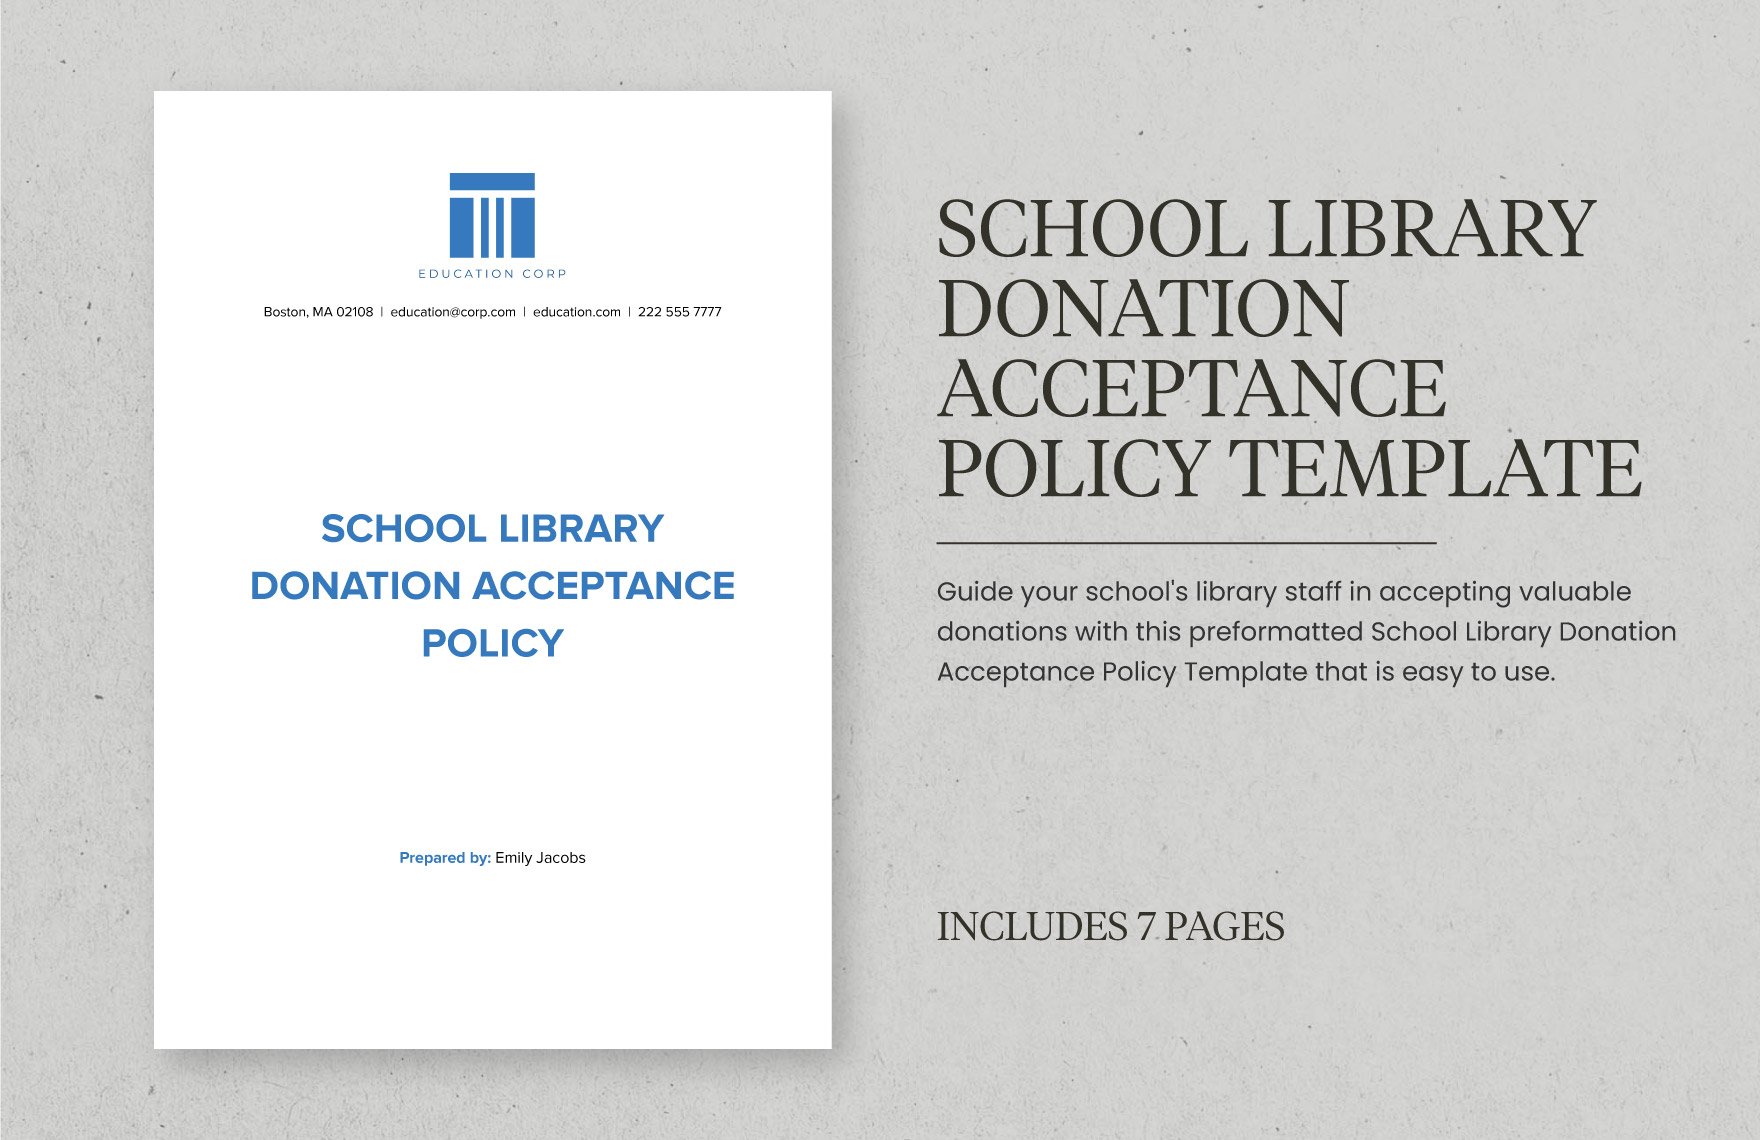 School Library Donation Acceptance Policy Template